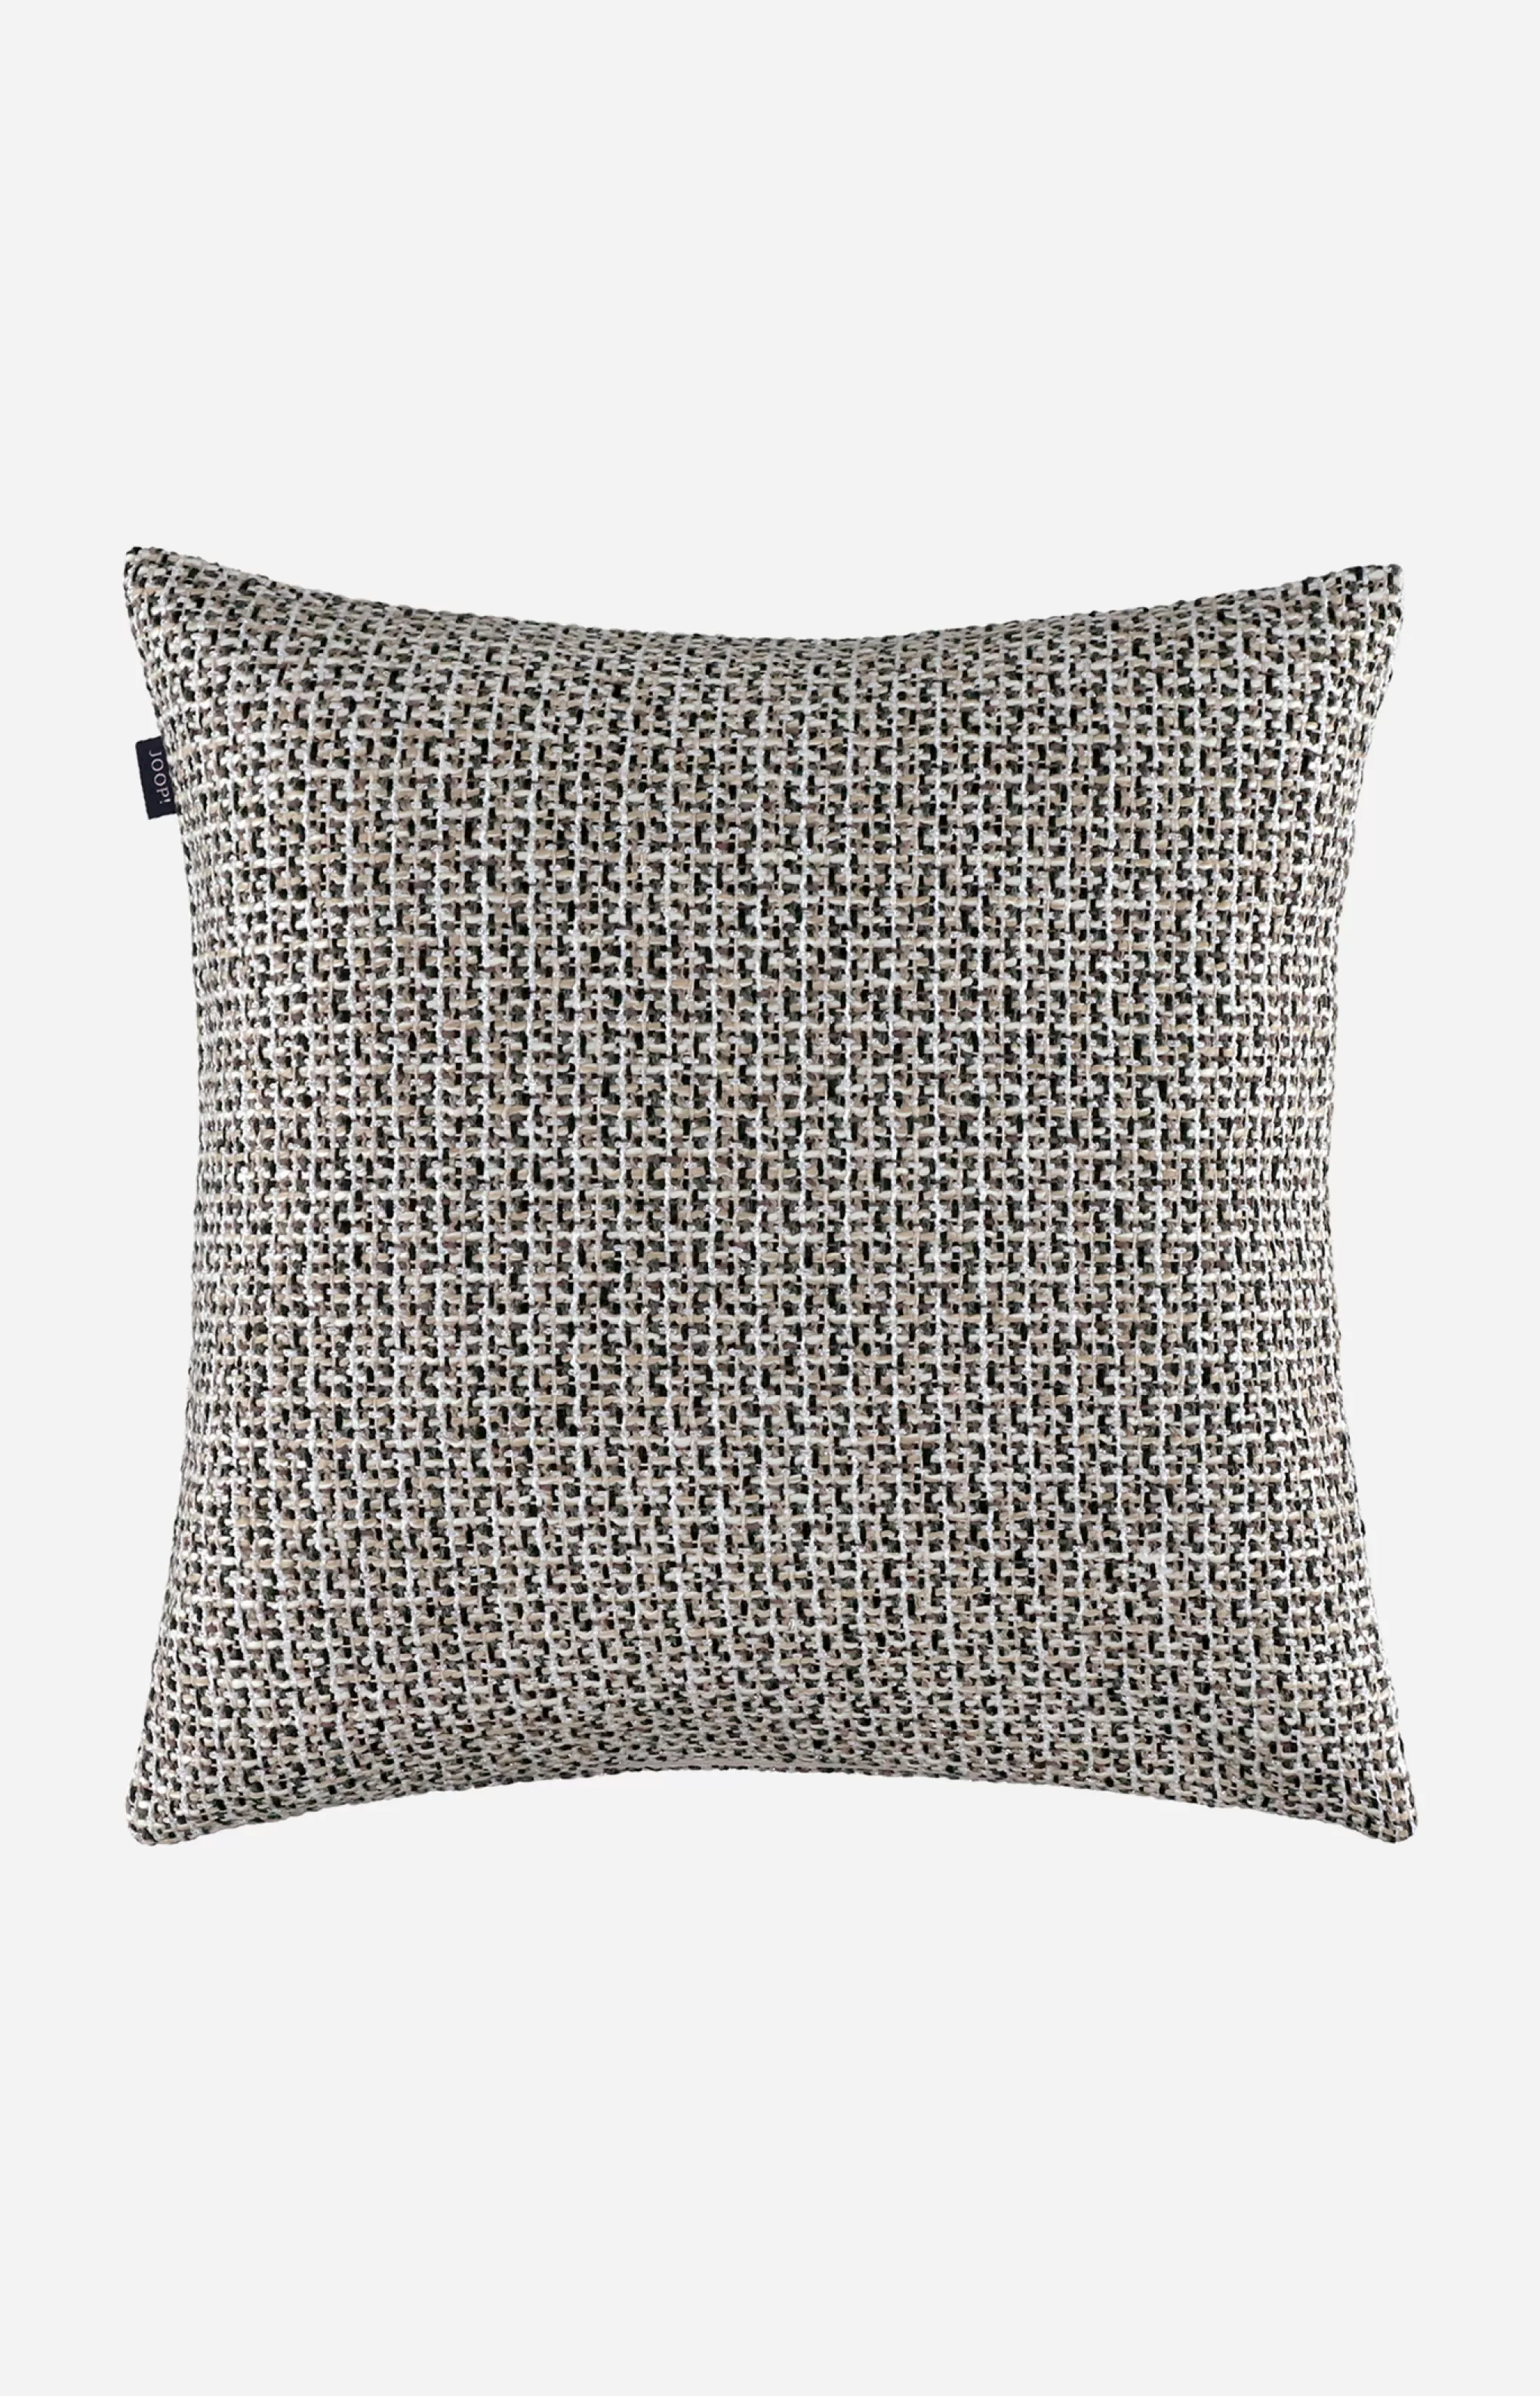 Decorative Cushions | Discover Everything*JOOP Decorative Cushions | Discover Everything ! GRAND Decorative Cushion Cover in